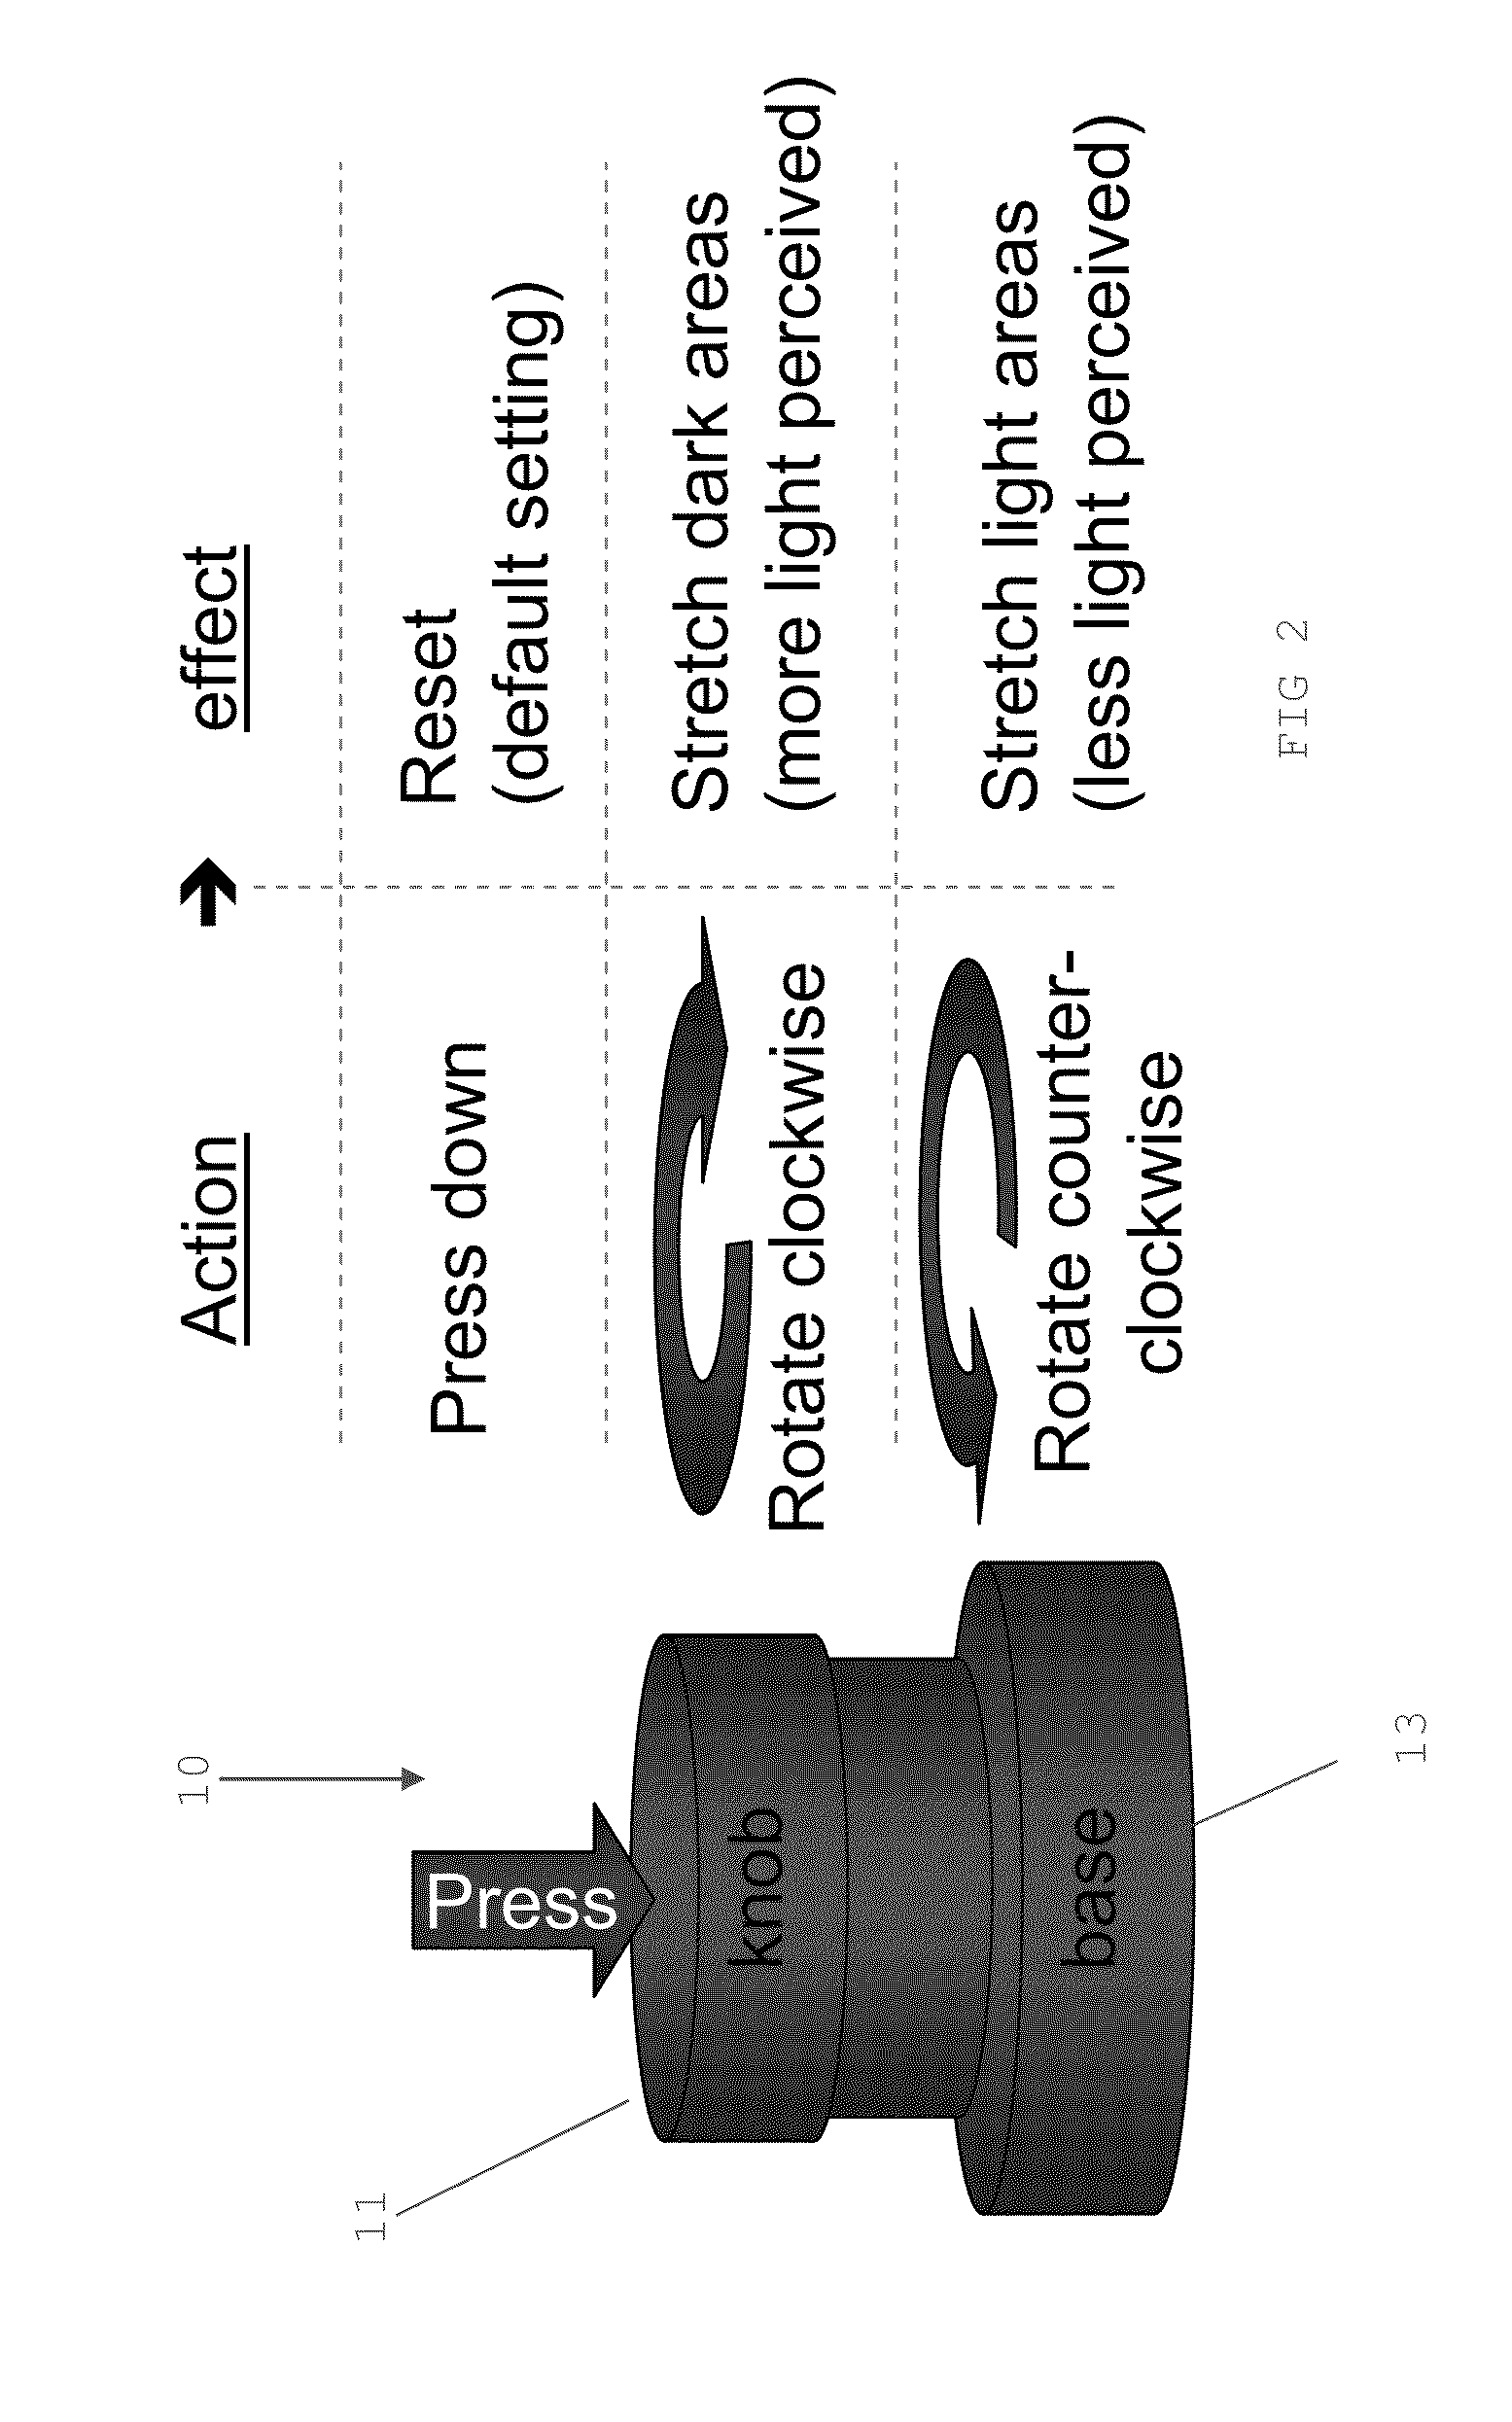 Display with optical microscope emulation functionality